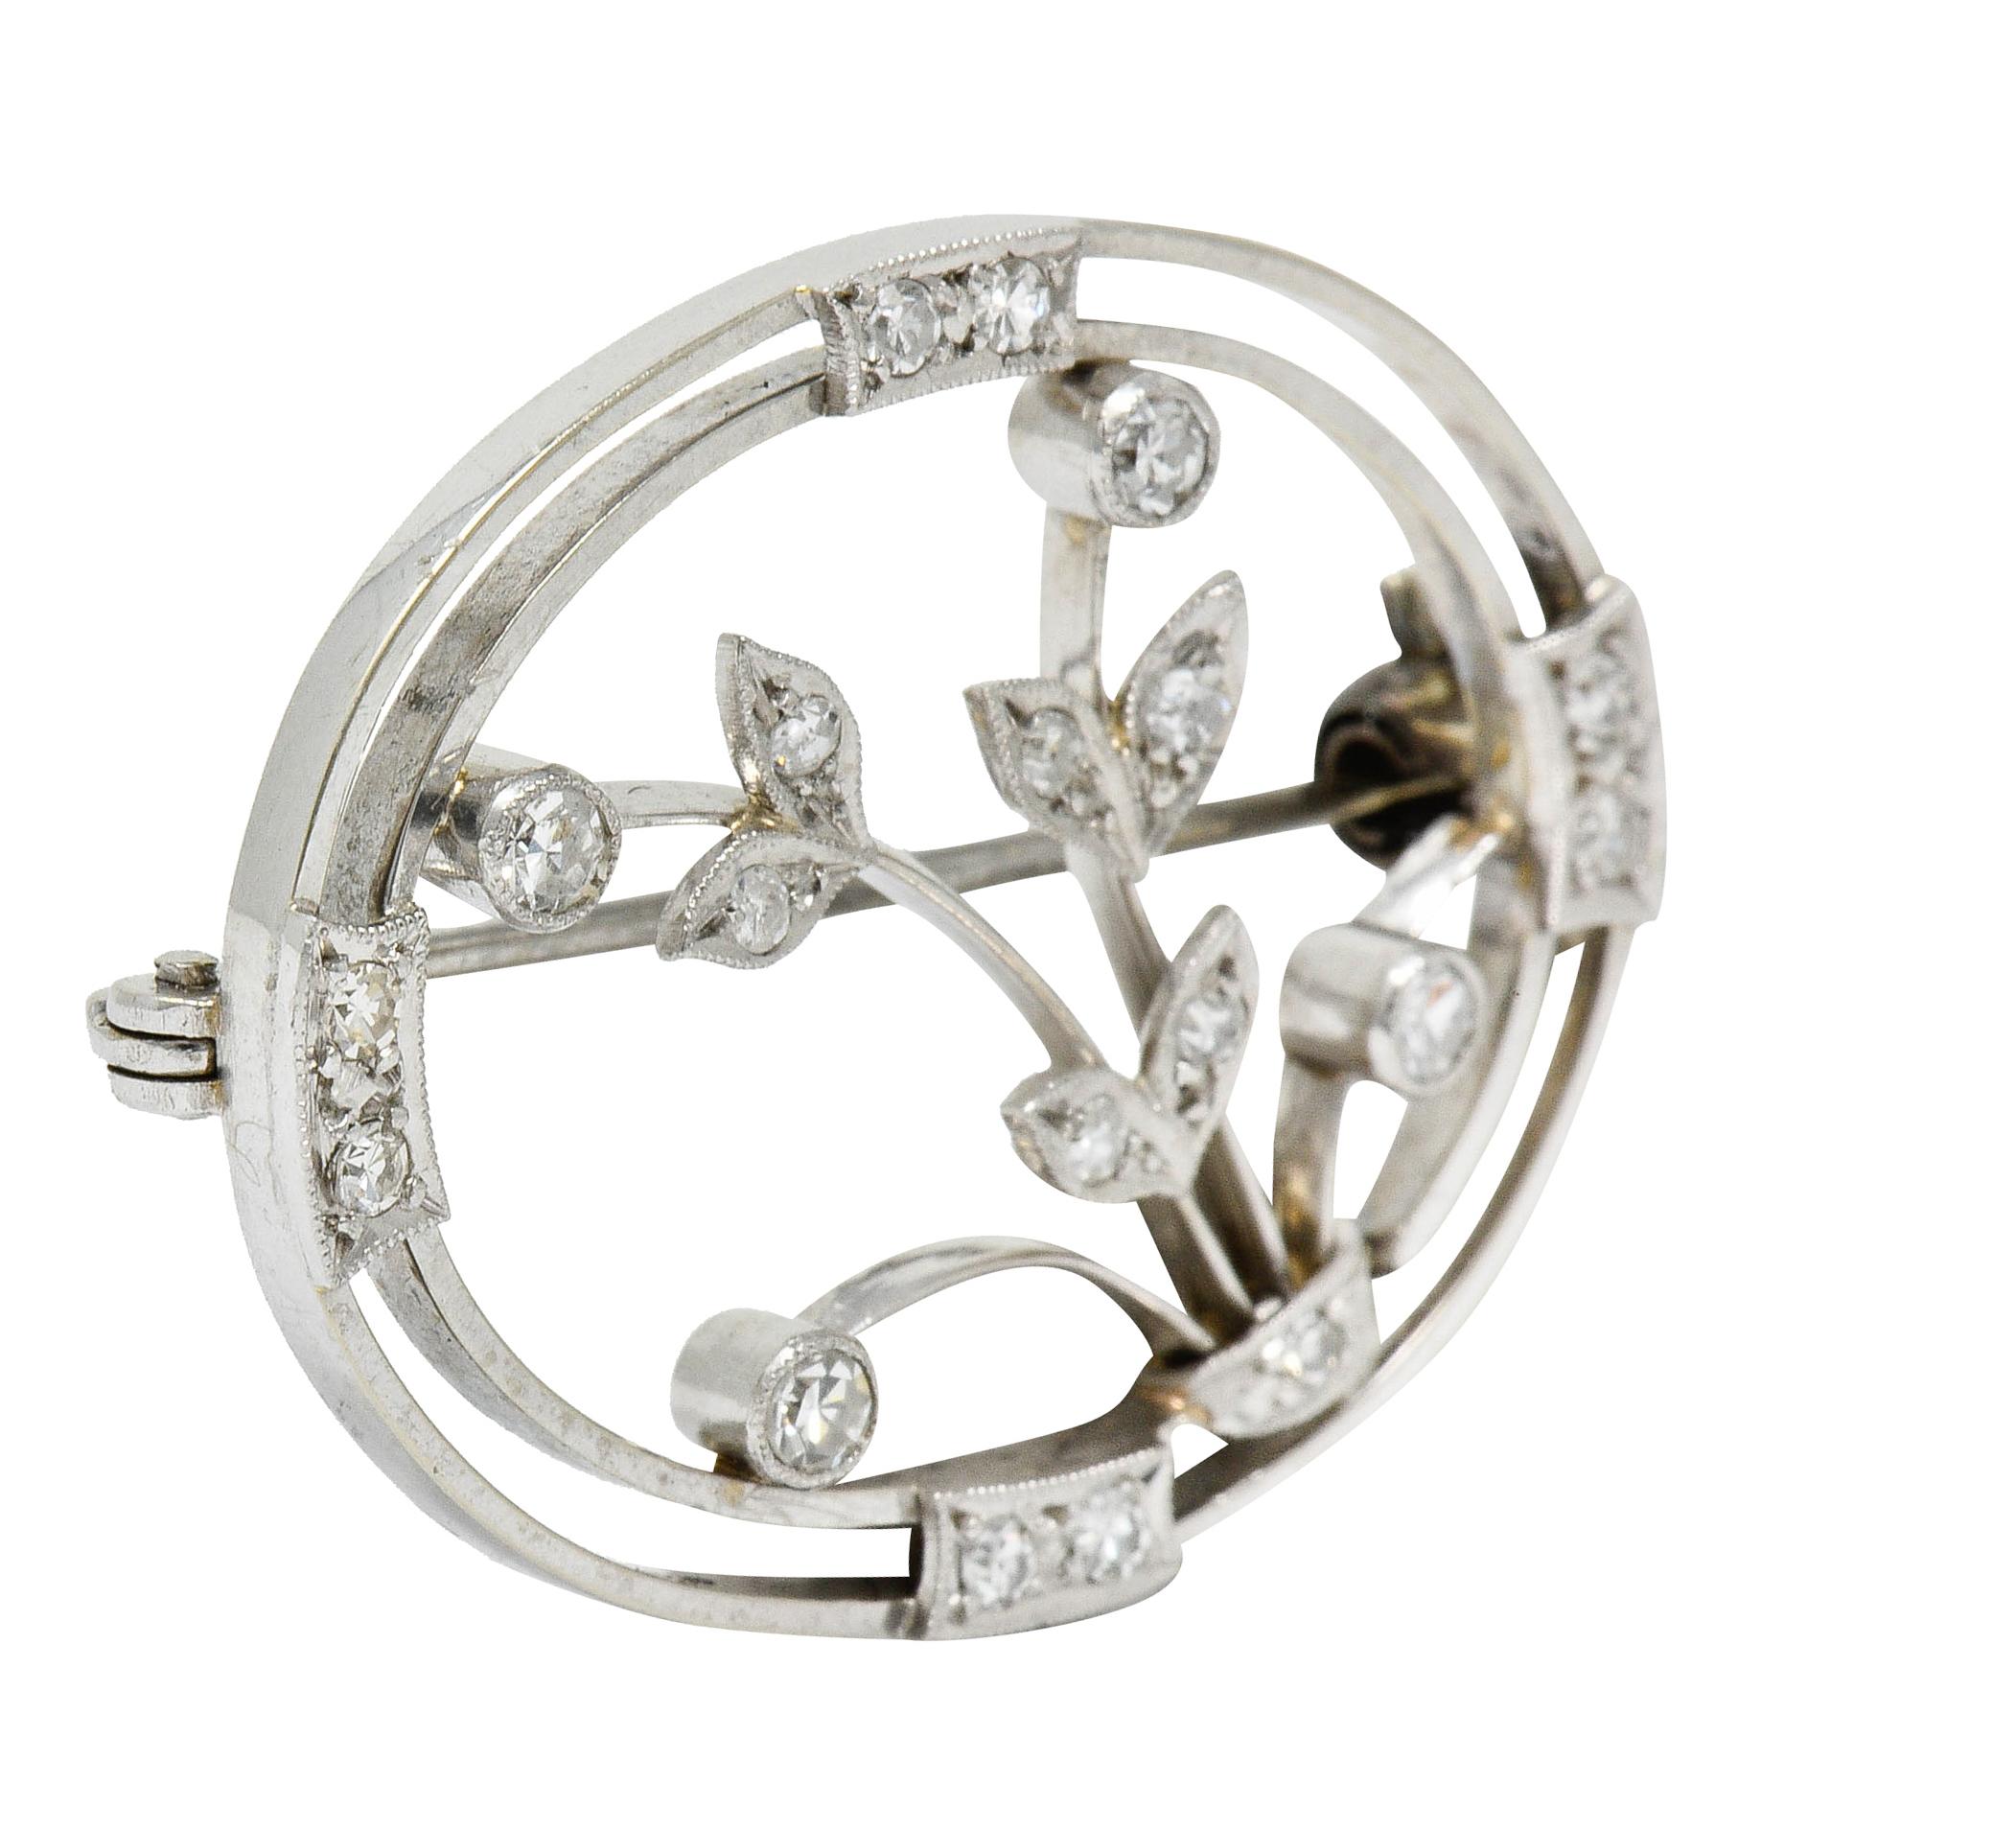 Brooch depicts a stylized platinum diamond floral arrangement

Within an 18 karat gold concentric oval frame

Single cut diamonds weigh in total approximately 0.38 carat; eye-clean and white

Stamped Plat and 18CT for platinum and 18 karat gold,